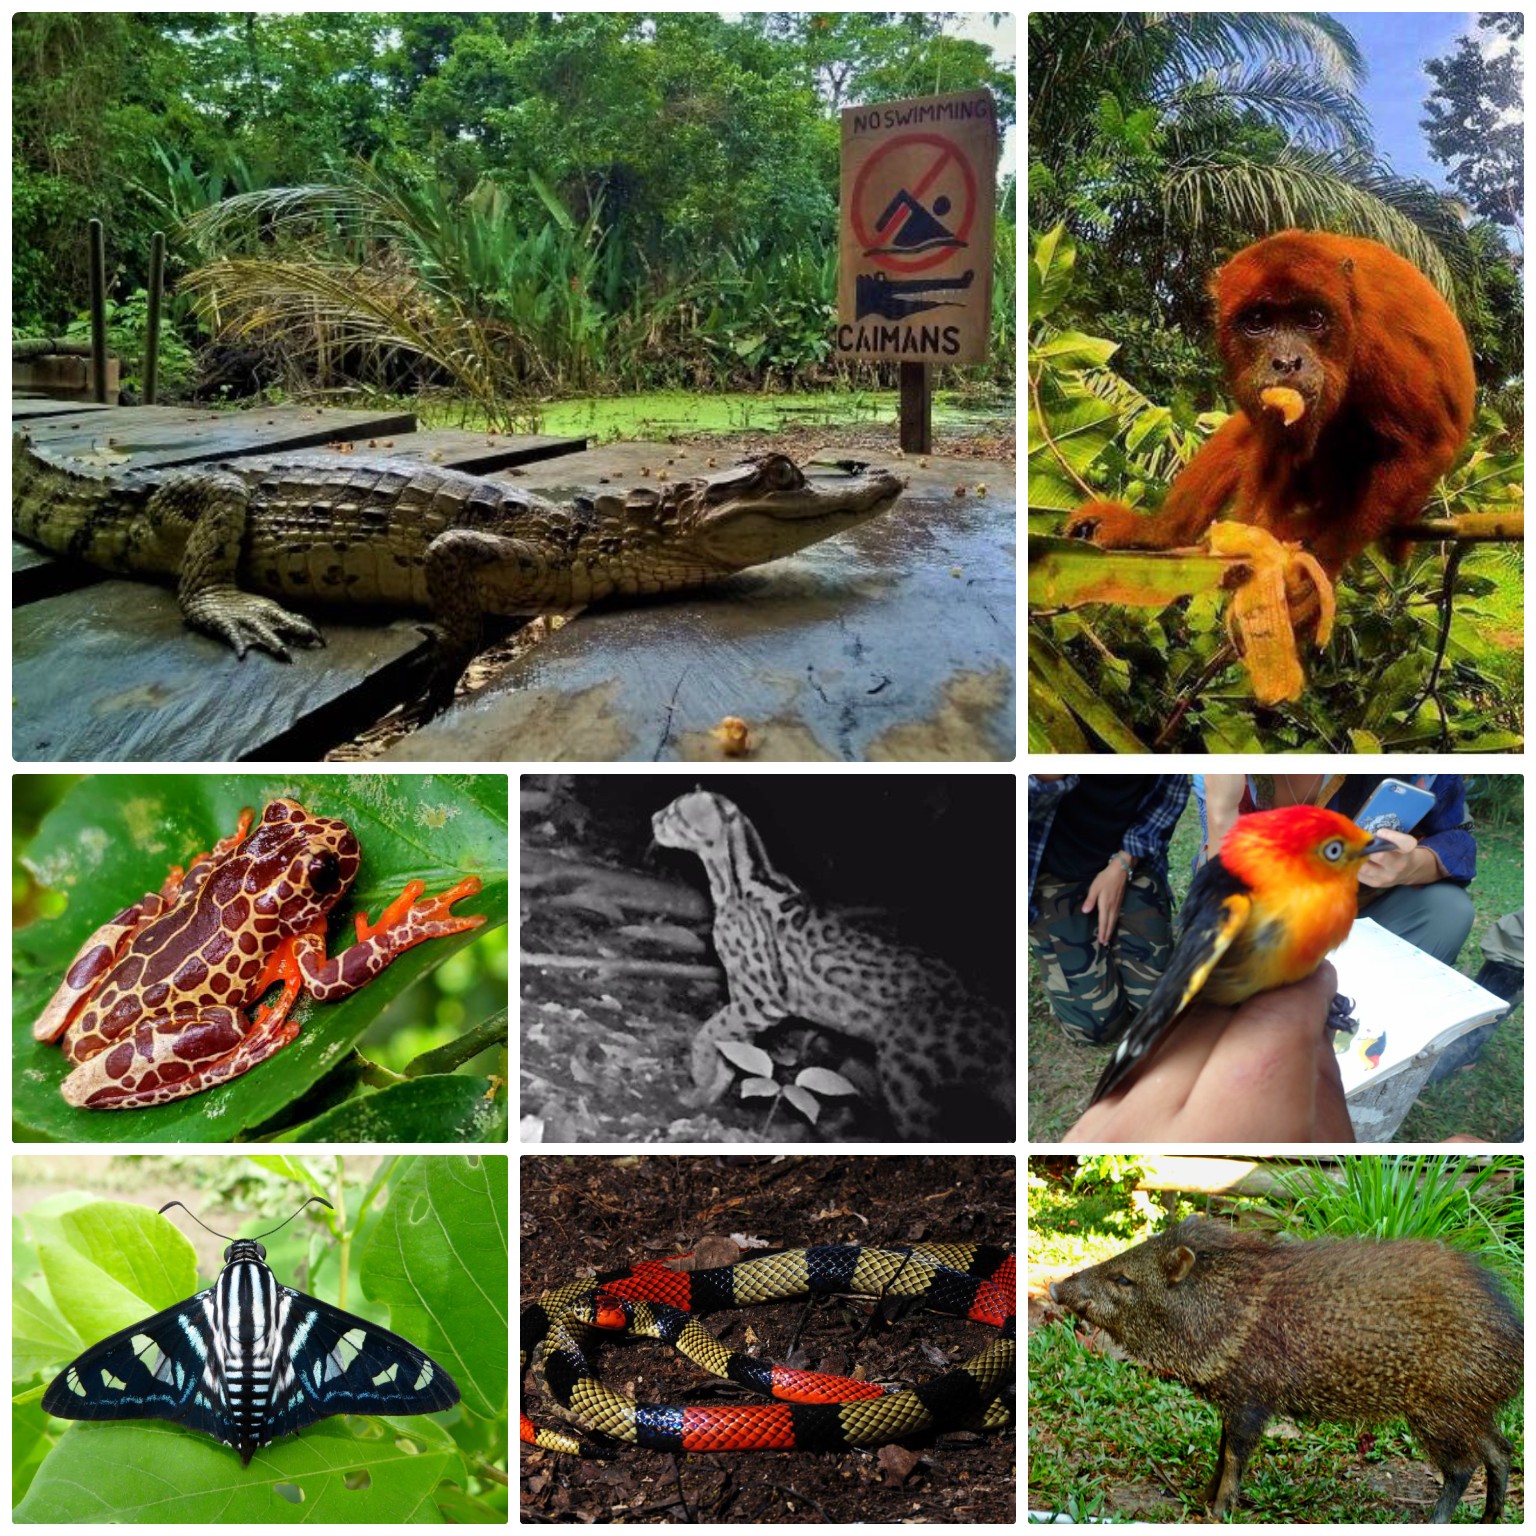 Thumbnail for the post titled: Listed Species in the Reserve